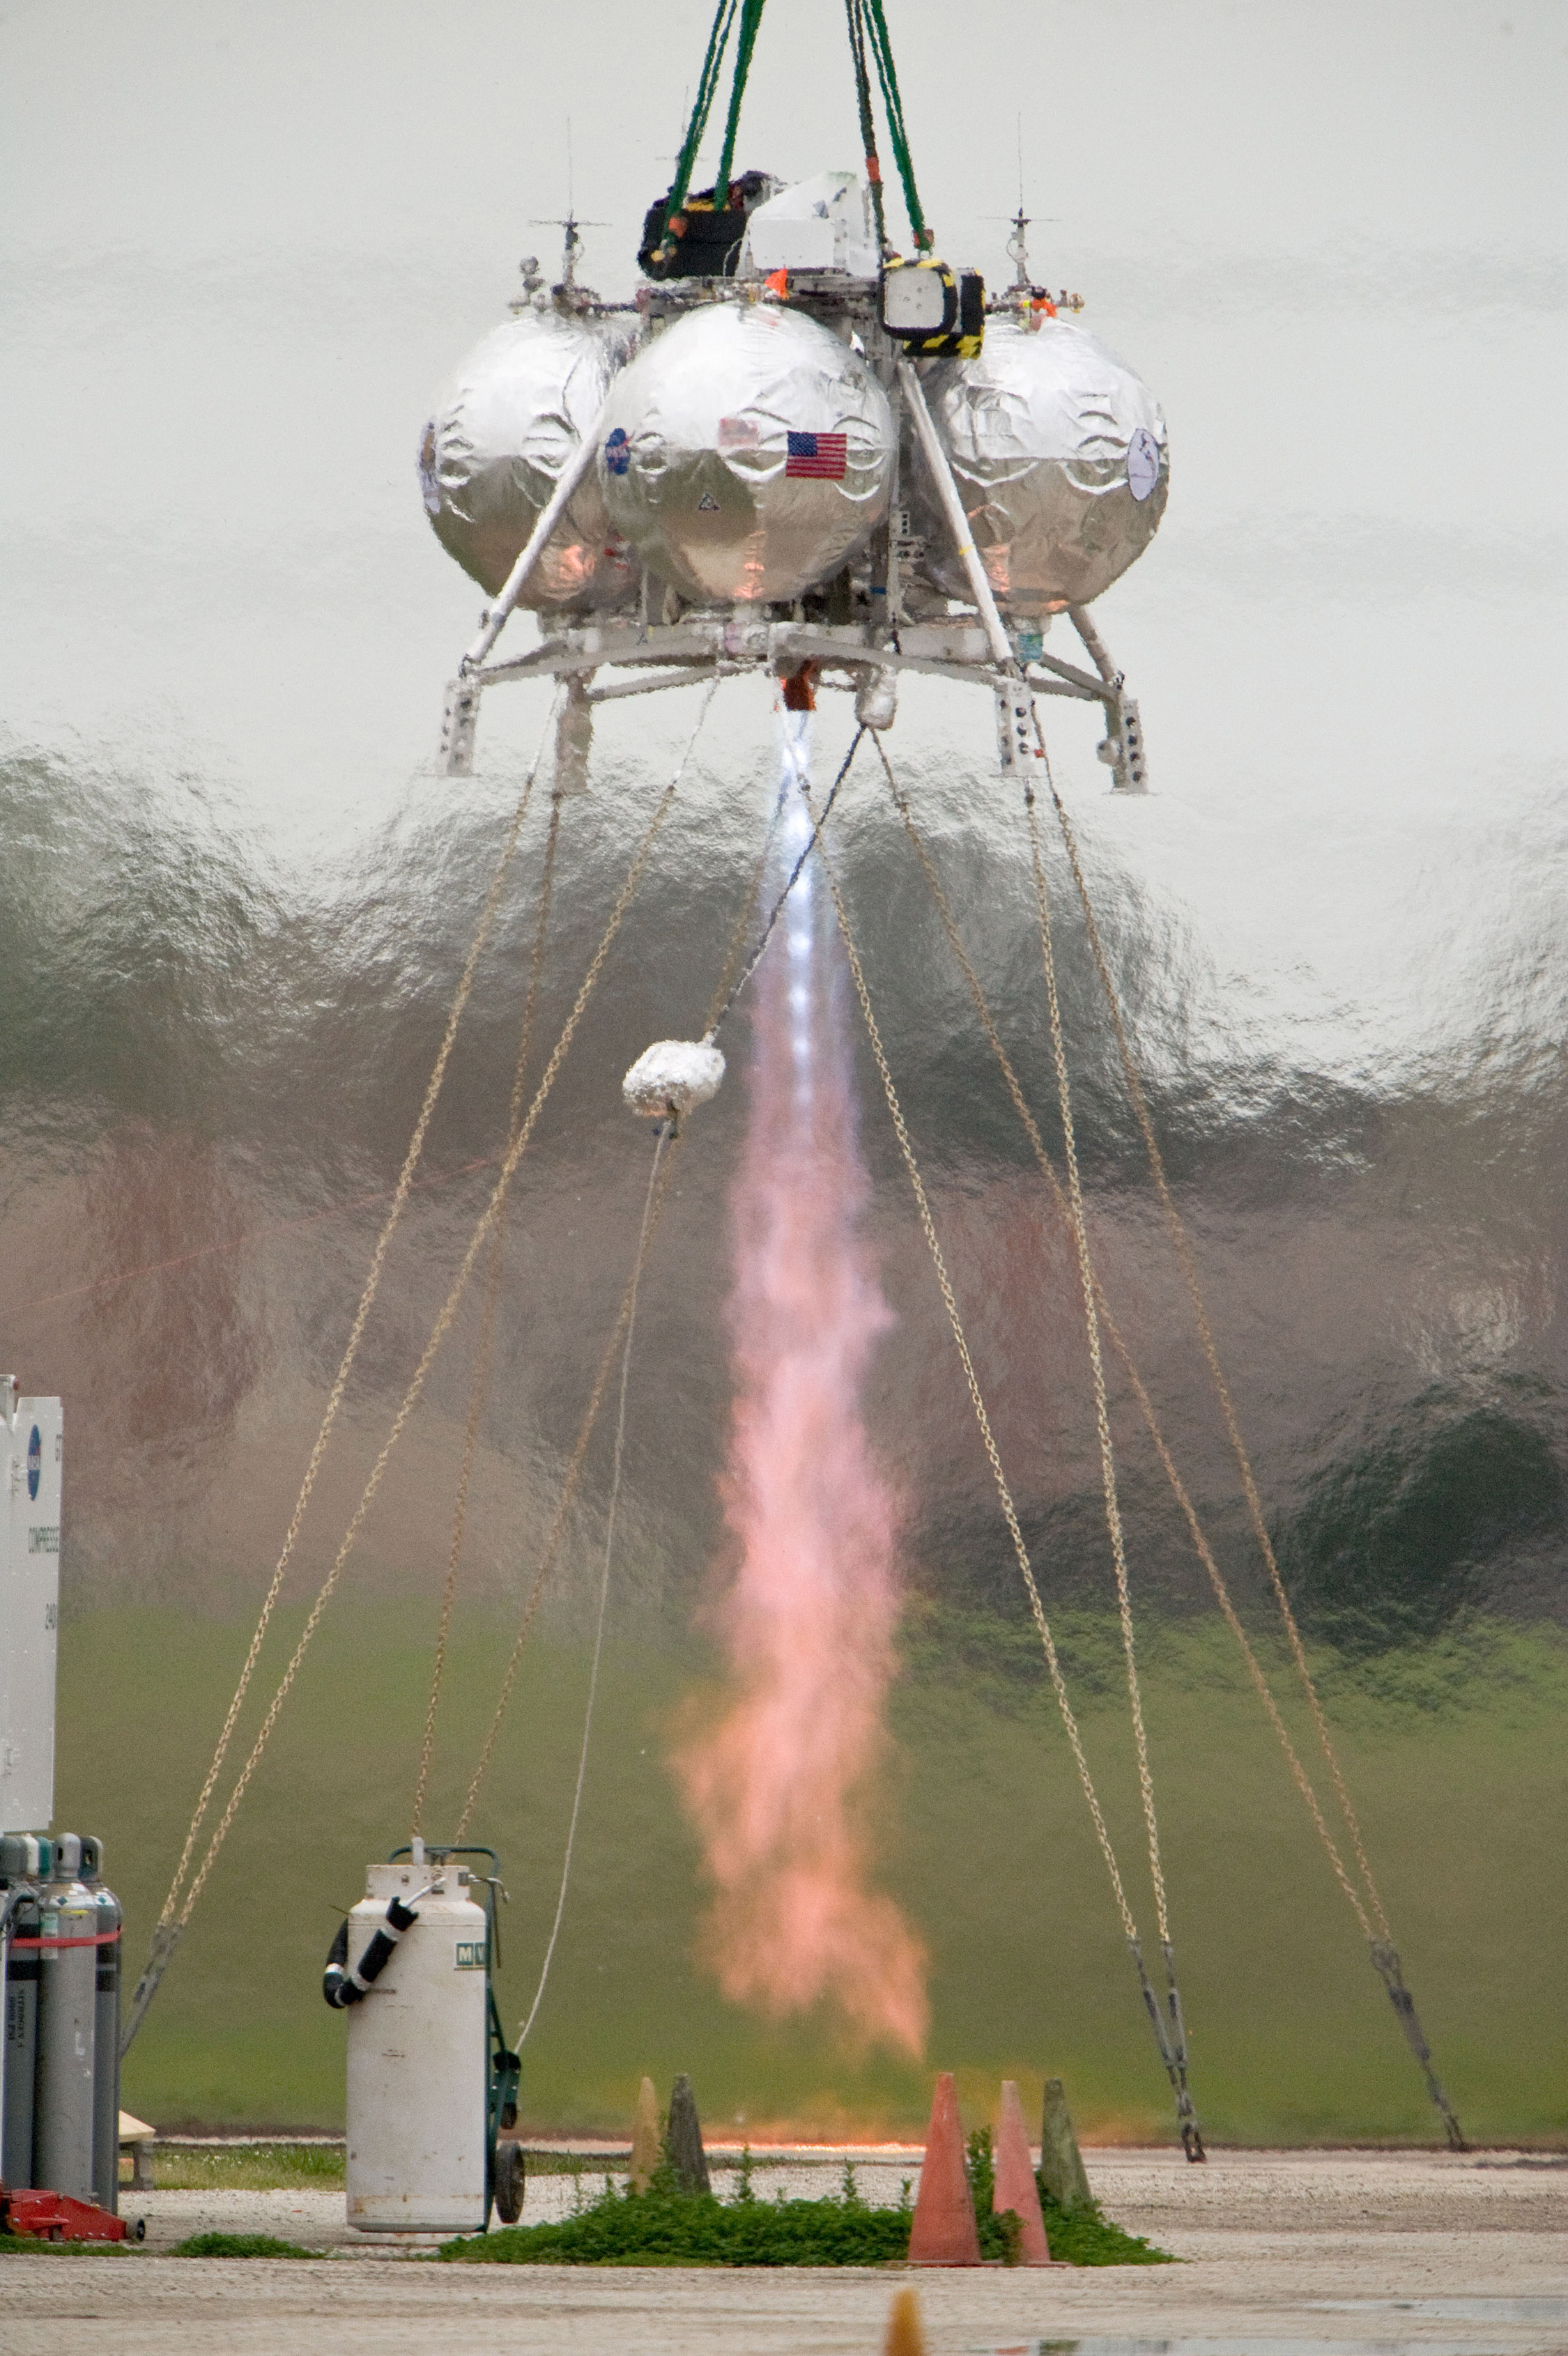 A successful hot fire test of the Morpheus engine in February 2012. Credit: NASA/Lauren Harnett